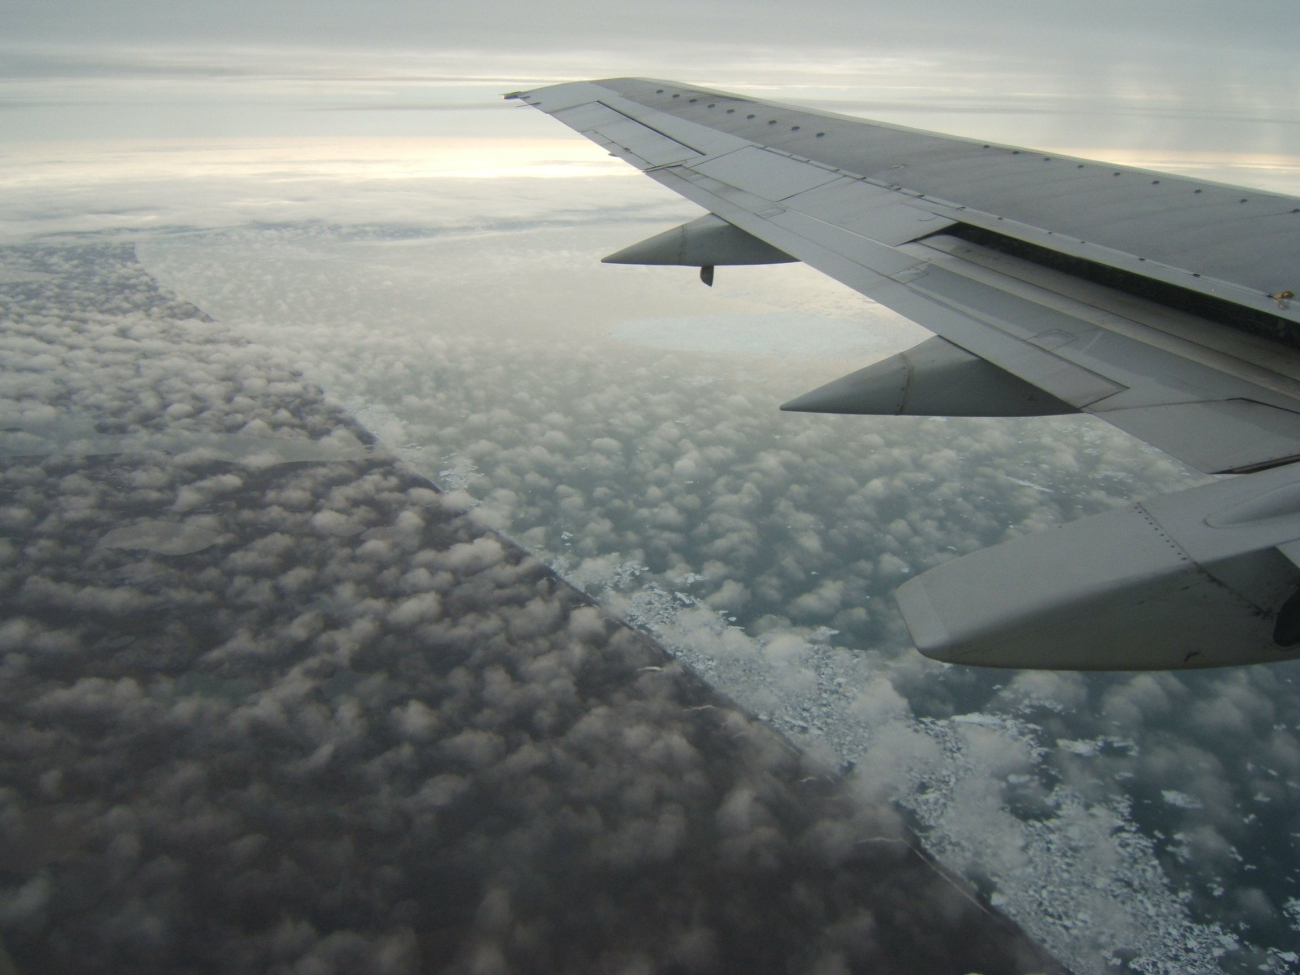 Flying over the Arctic coastline prior to landing at Barrow